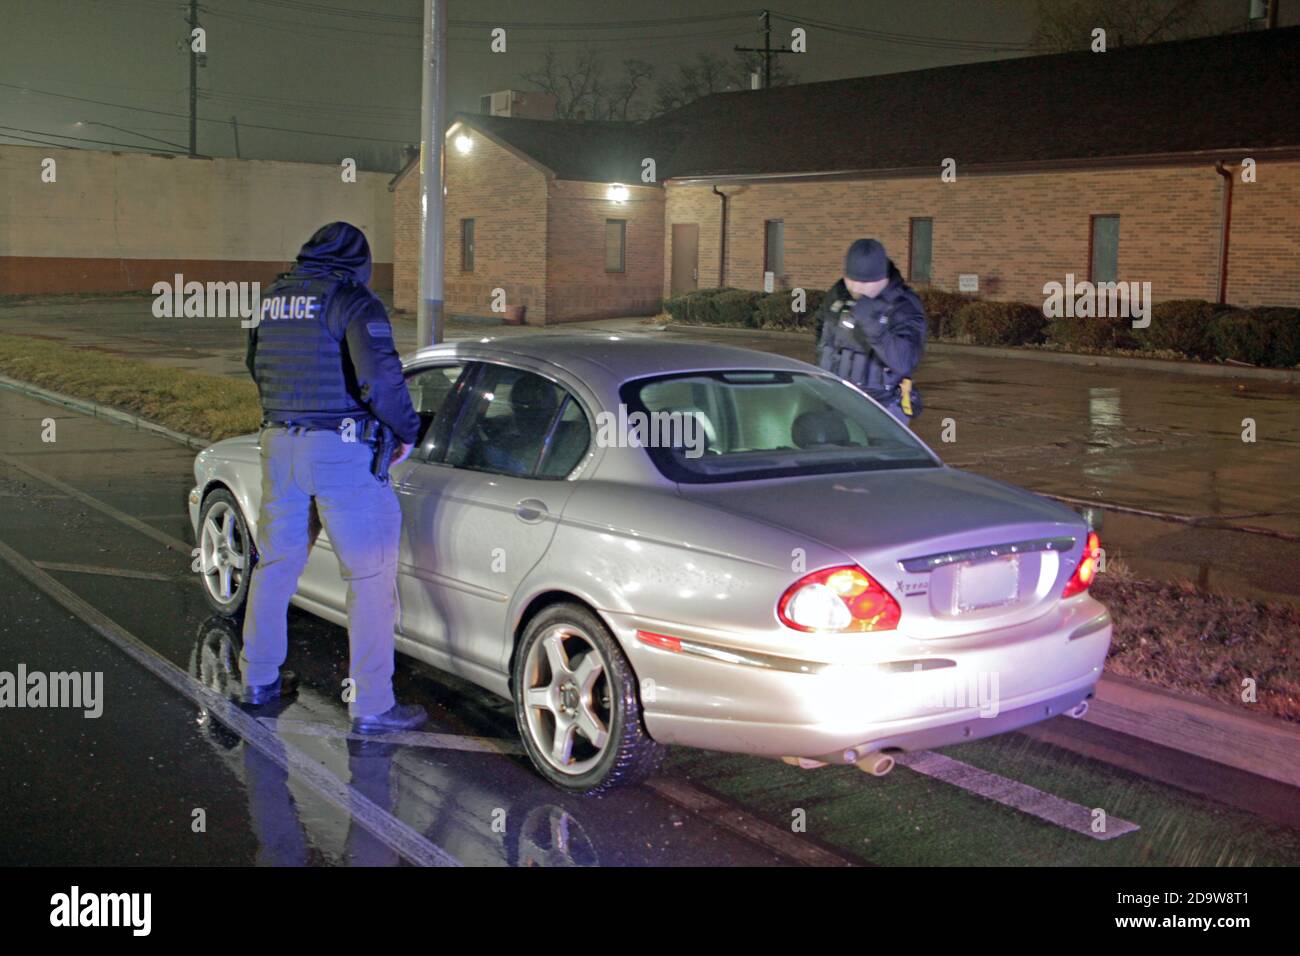 Detroit police officers speak to the driver of a car on a rainy night in Detroit, Michigan, USA Stock Photo